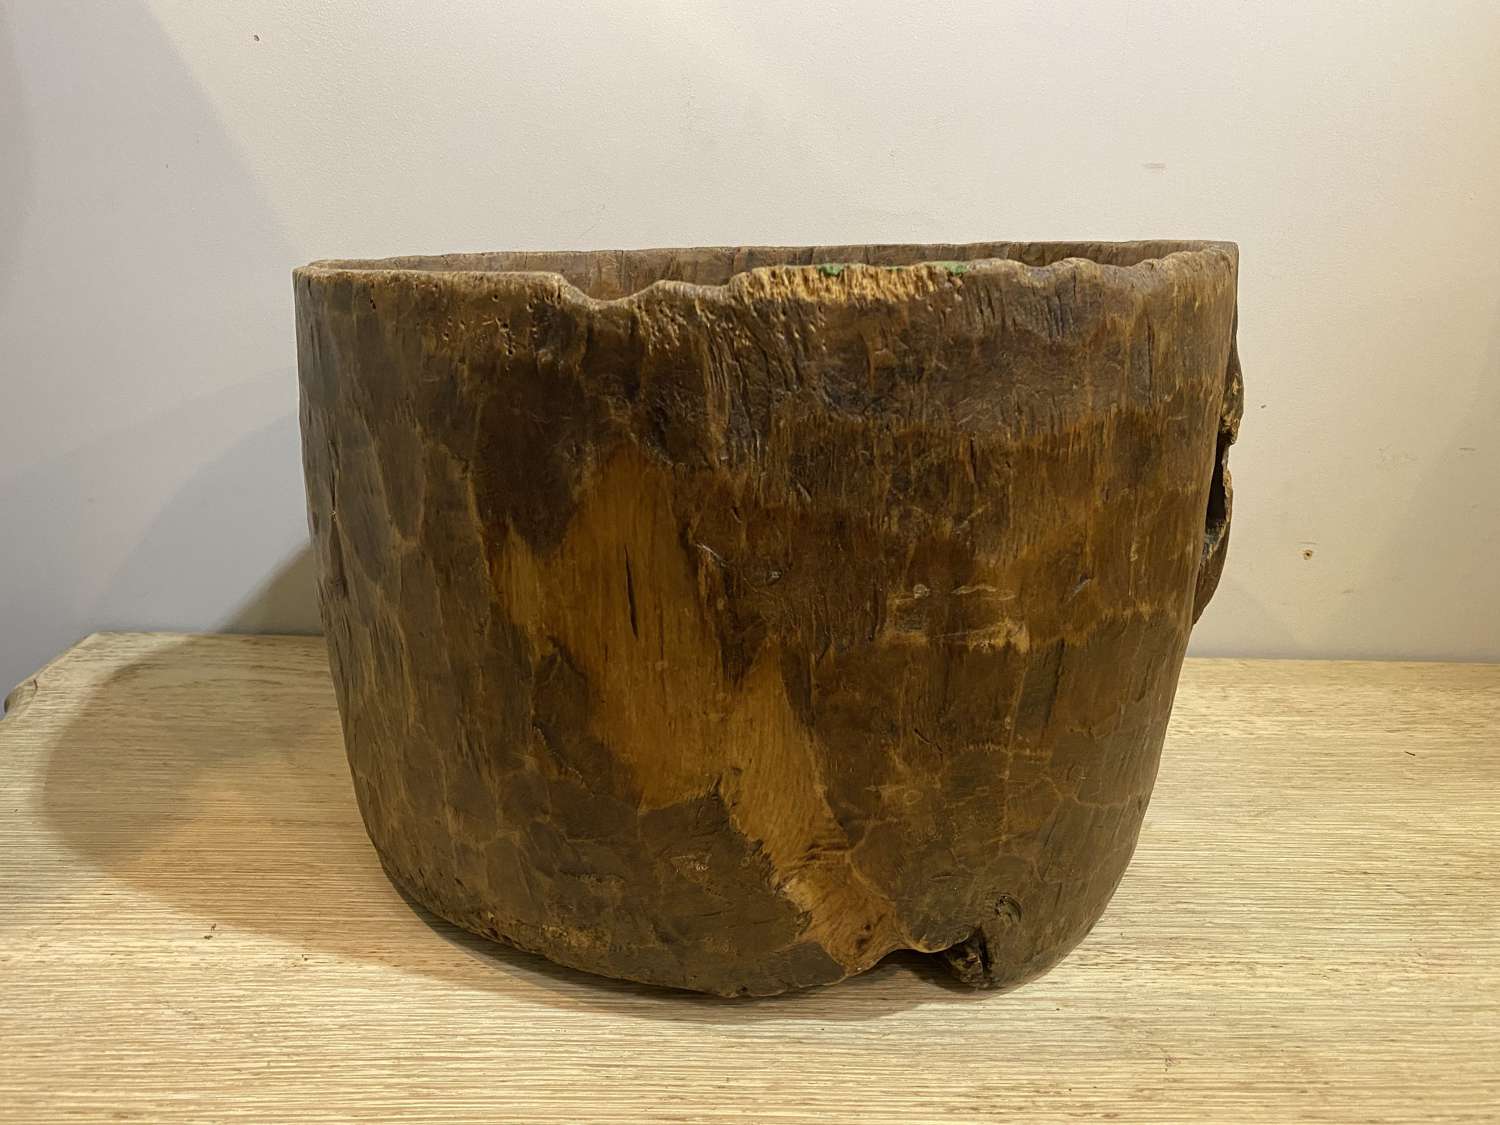 C1890 A Wooden Barrel Carved from a tree trunk